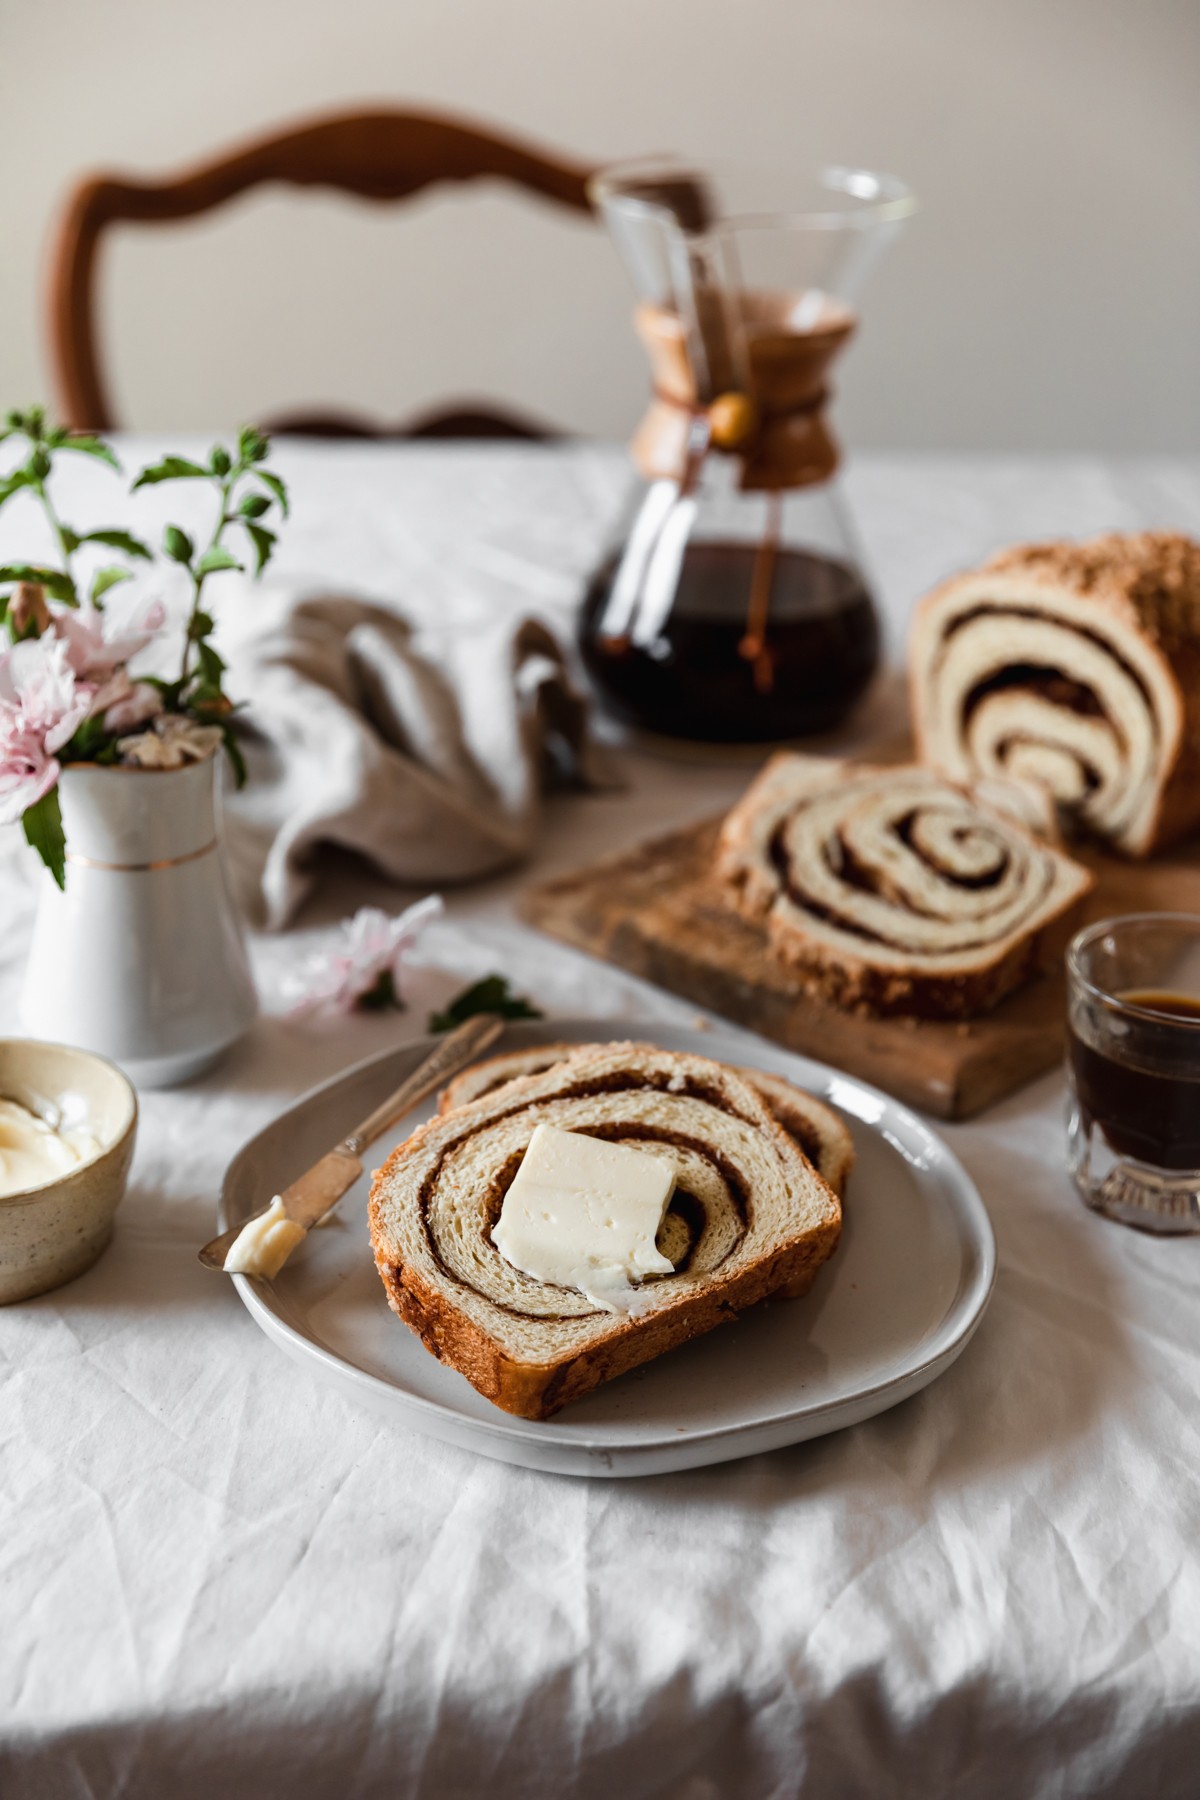 A white plate with two slices of cinnamon swirl bread topped with a smear of butter next to a wood board with a loaf of bread, a white vase of pink flowers, a cream-colored bowl of butter, a Chemex, and a beige linen on a white table cloth with a wooden chair in the background.